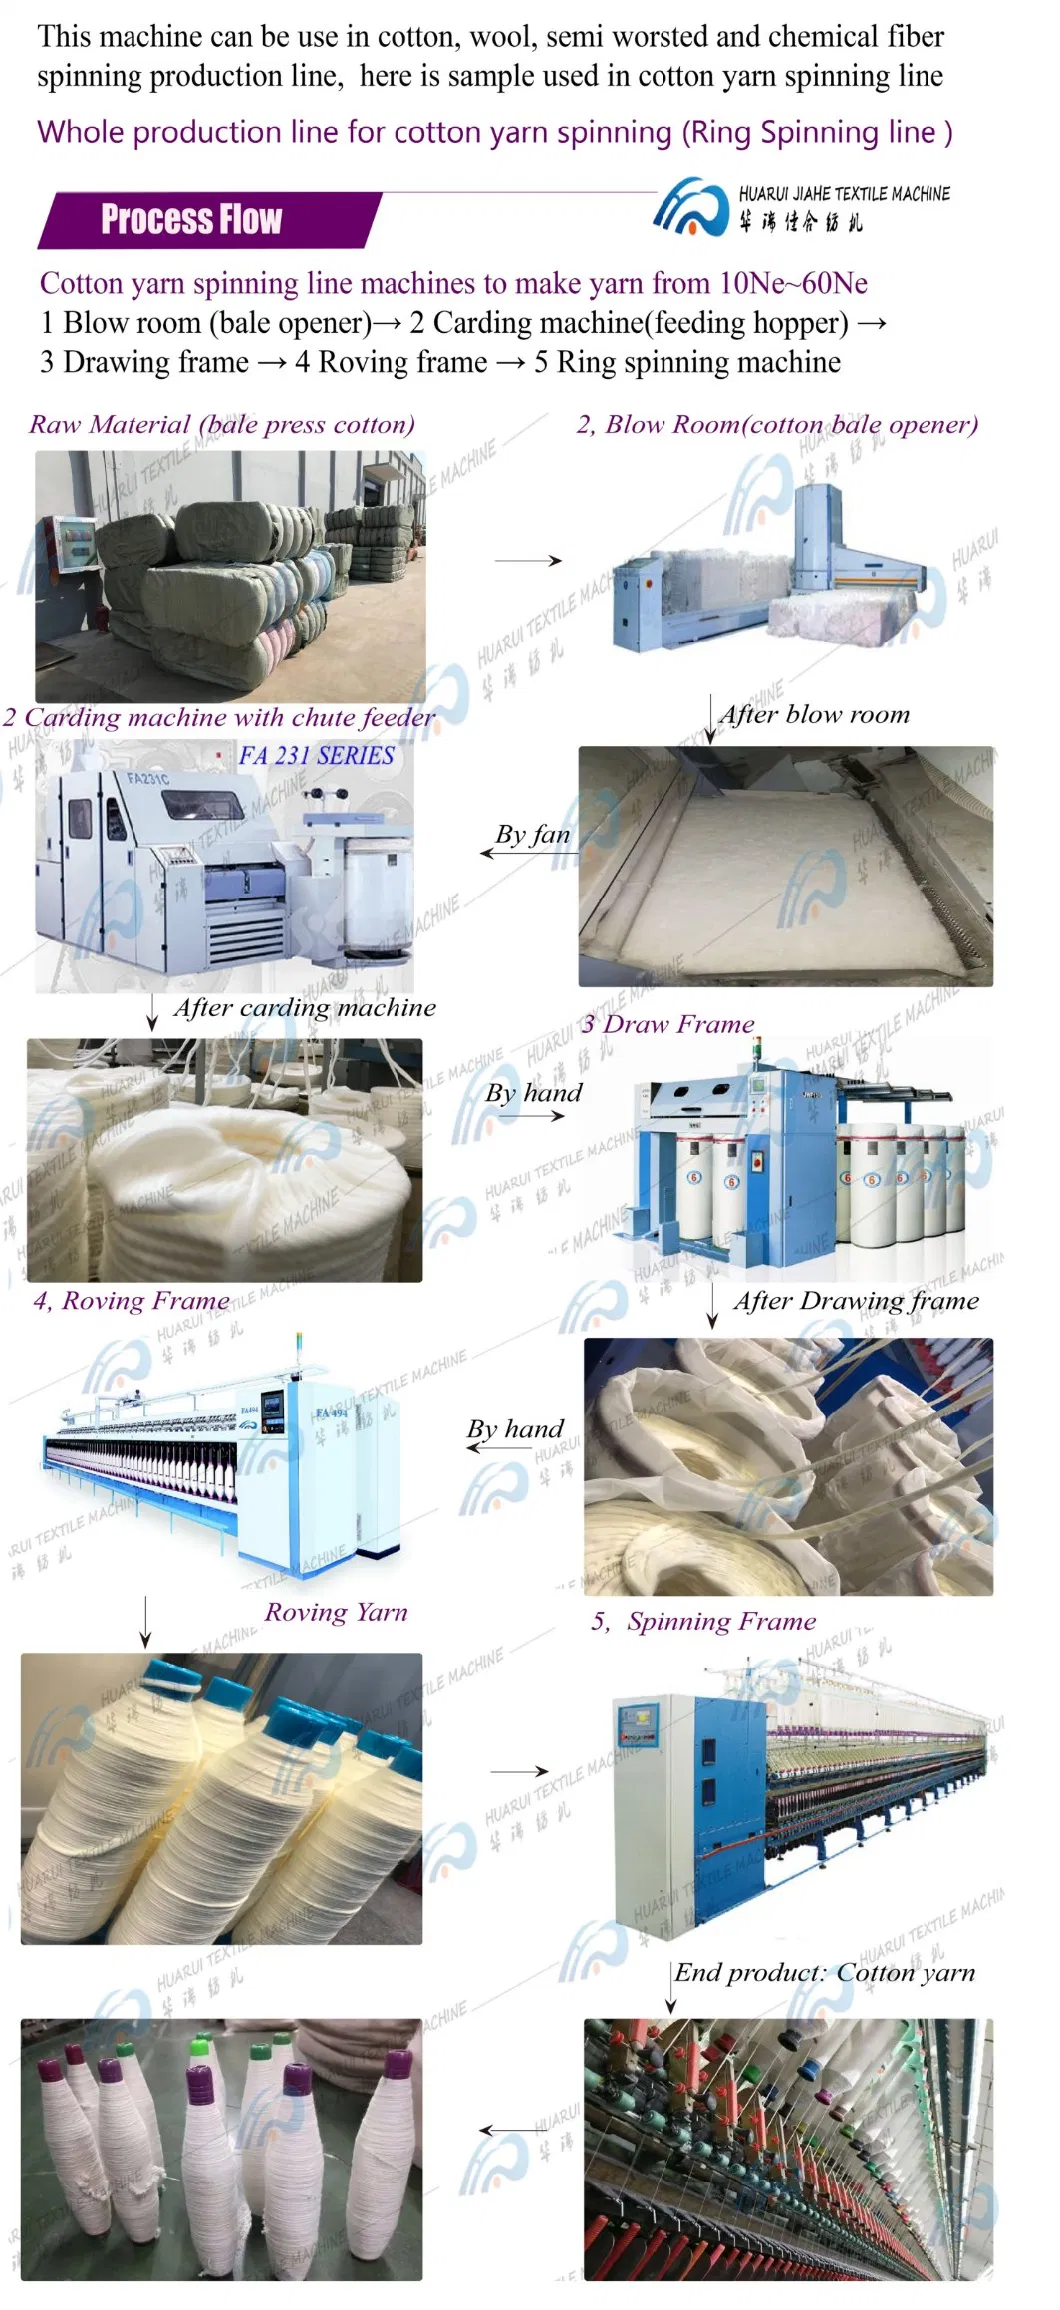 Medium Size Fabric Dyeing Equipment, Lace Dyeing, High Temp Prototype, Zipper Dyeing Small Prototype Textile Cord Dyeing Machine Knitting Dyeing Equipment